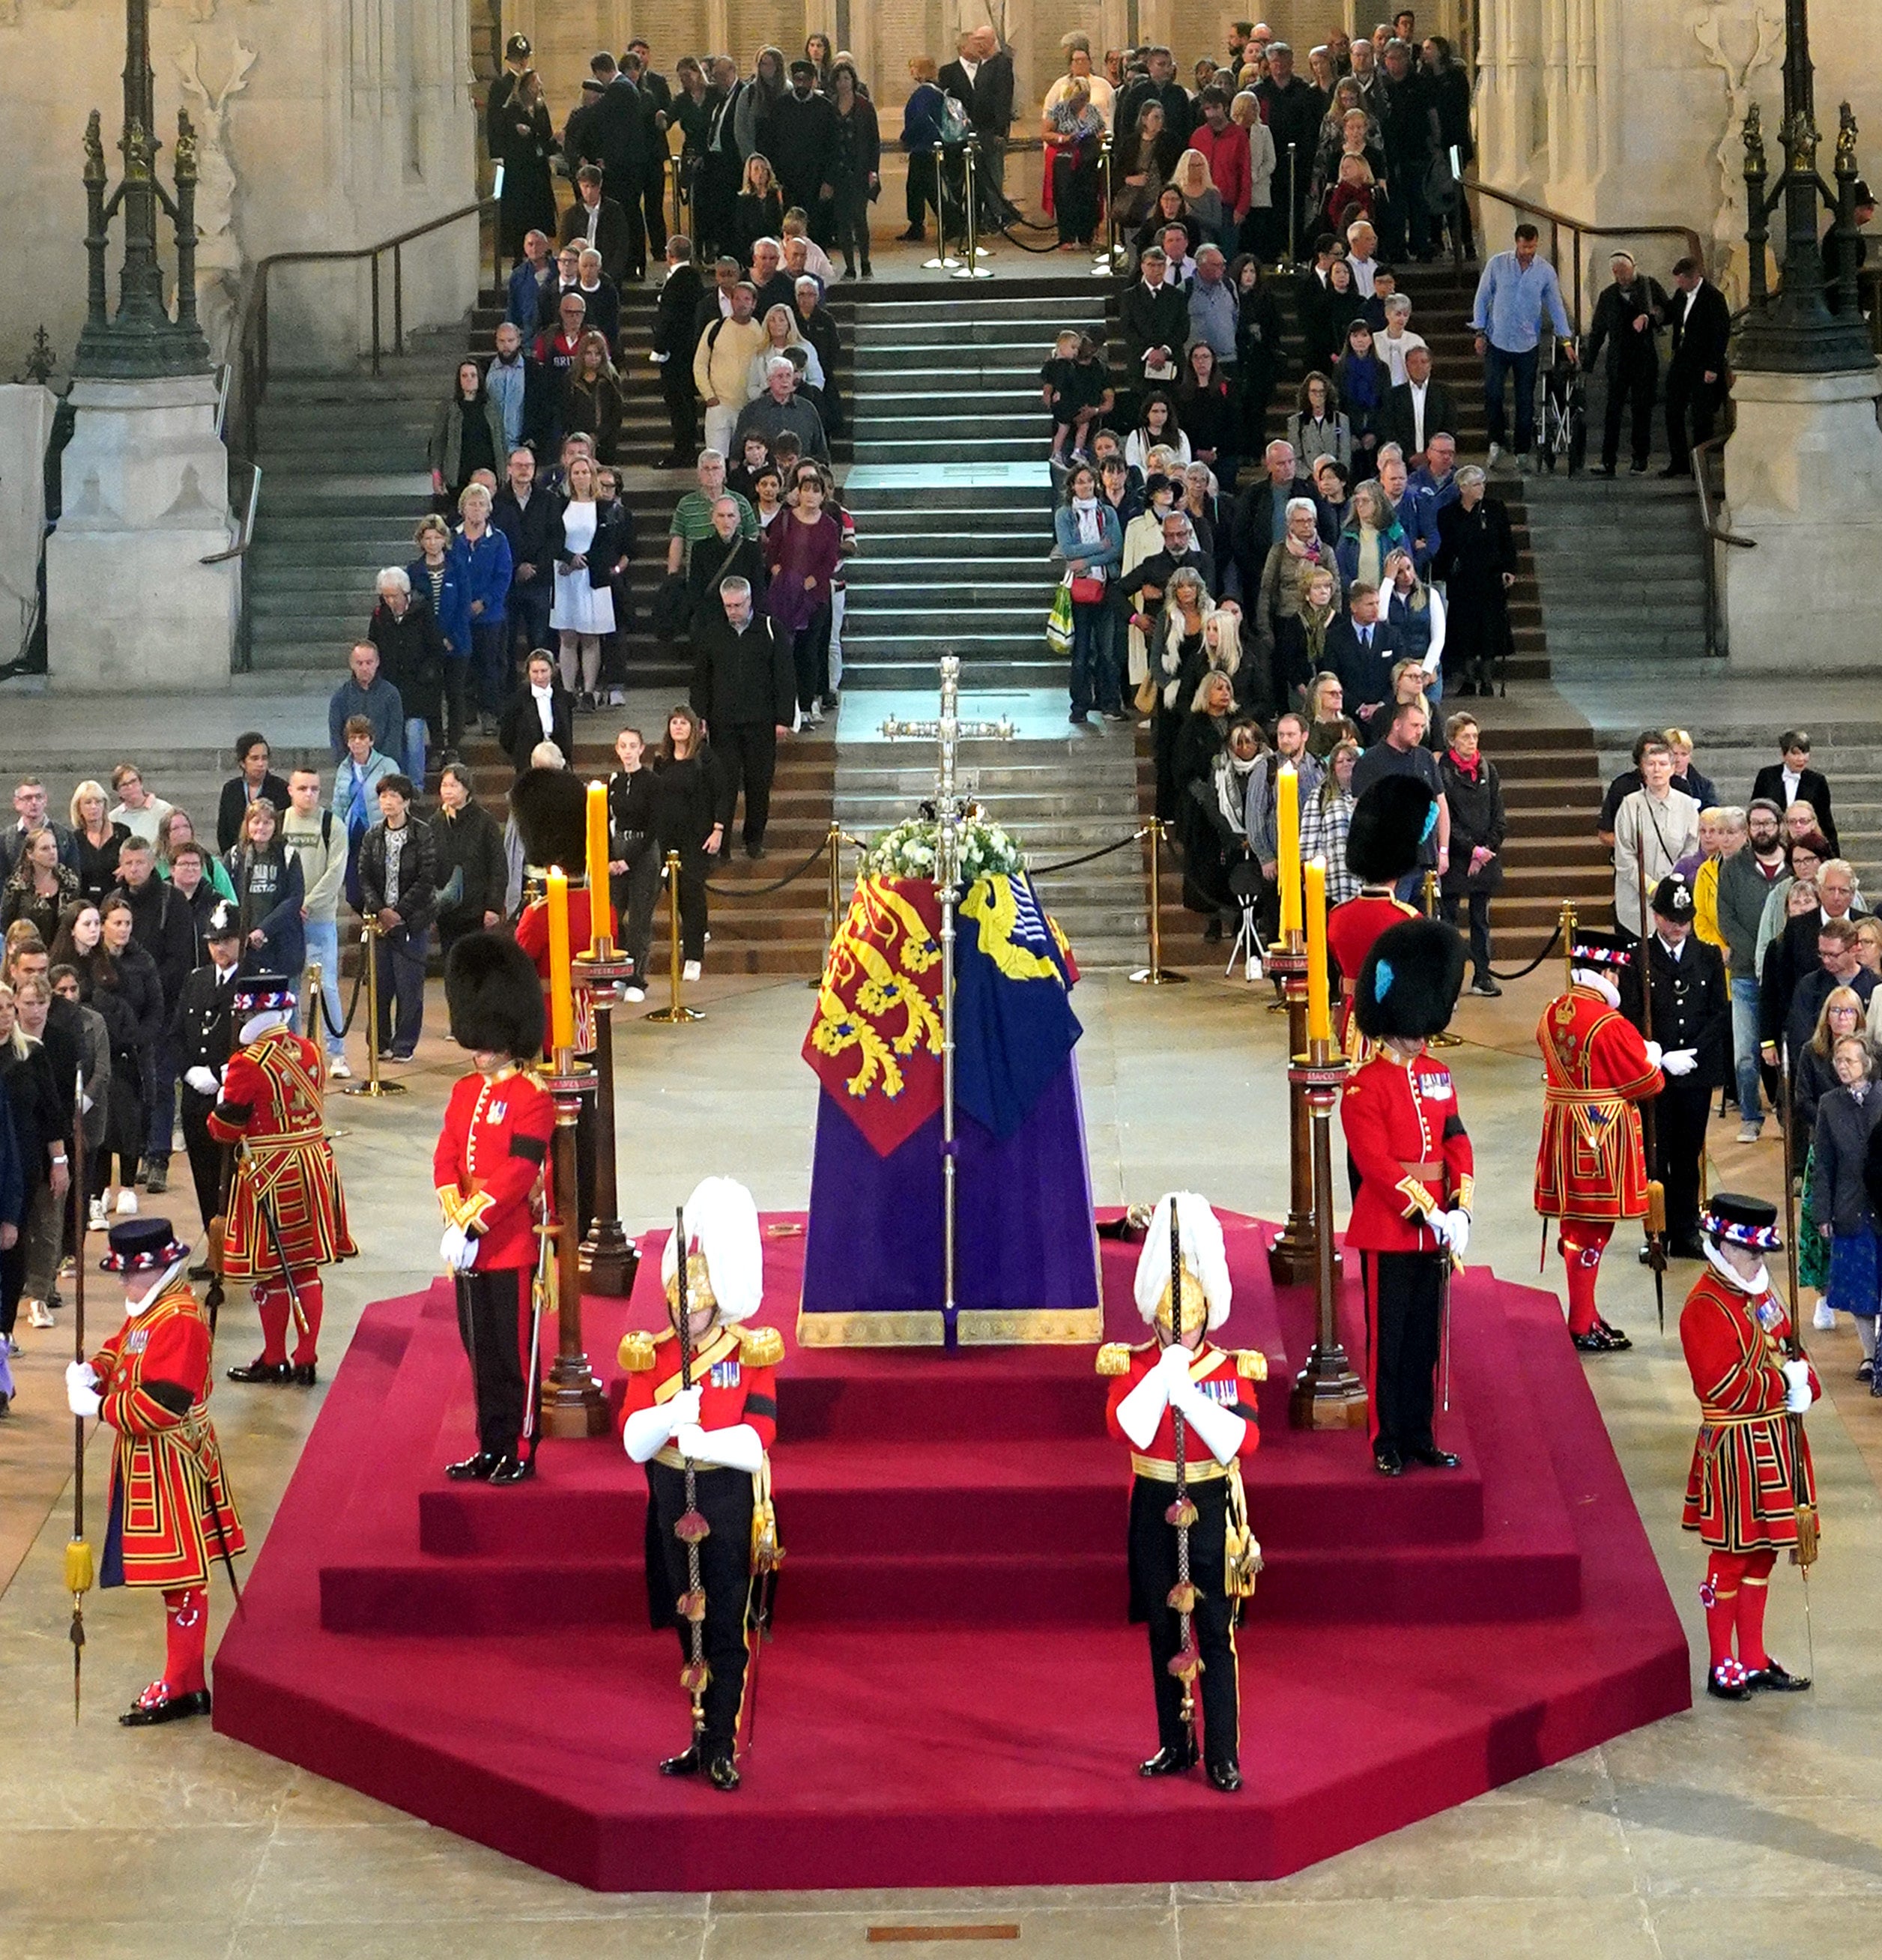 Members of the public file past the coffin of Queen Elizabeth II lying in state on the catafalque in Westminster Hall, at the Palace of Westminster, London, ahead of her funeral on Monday (Yui Mok/PA)